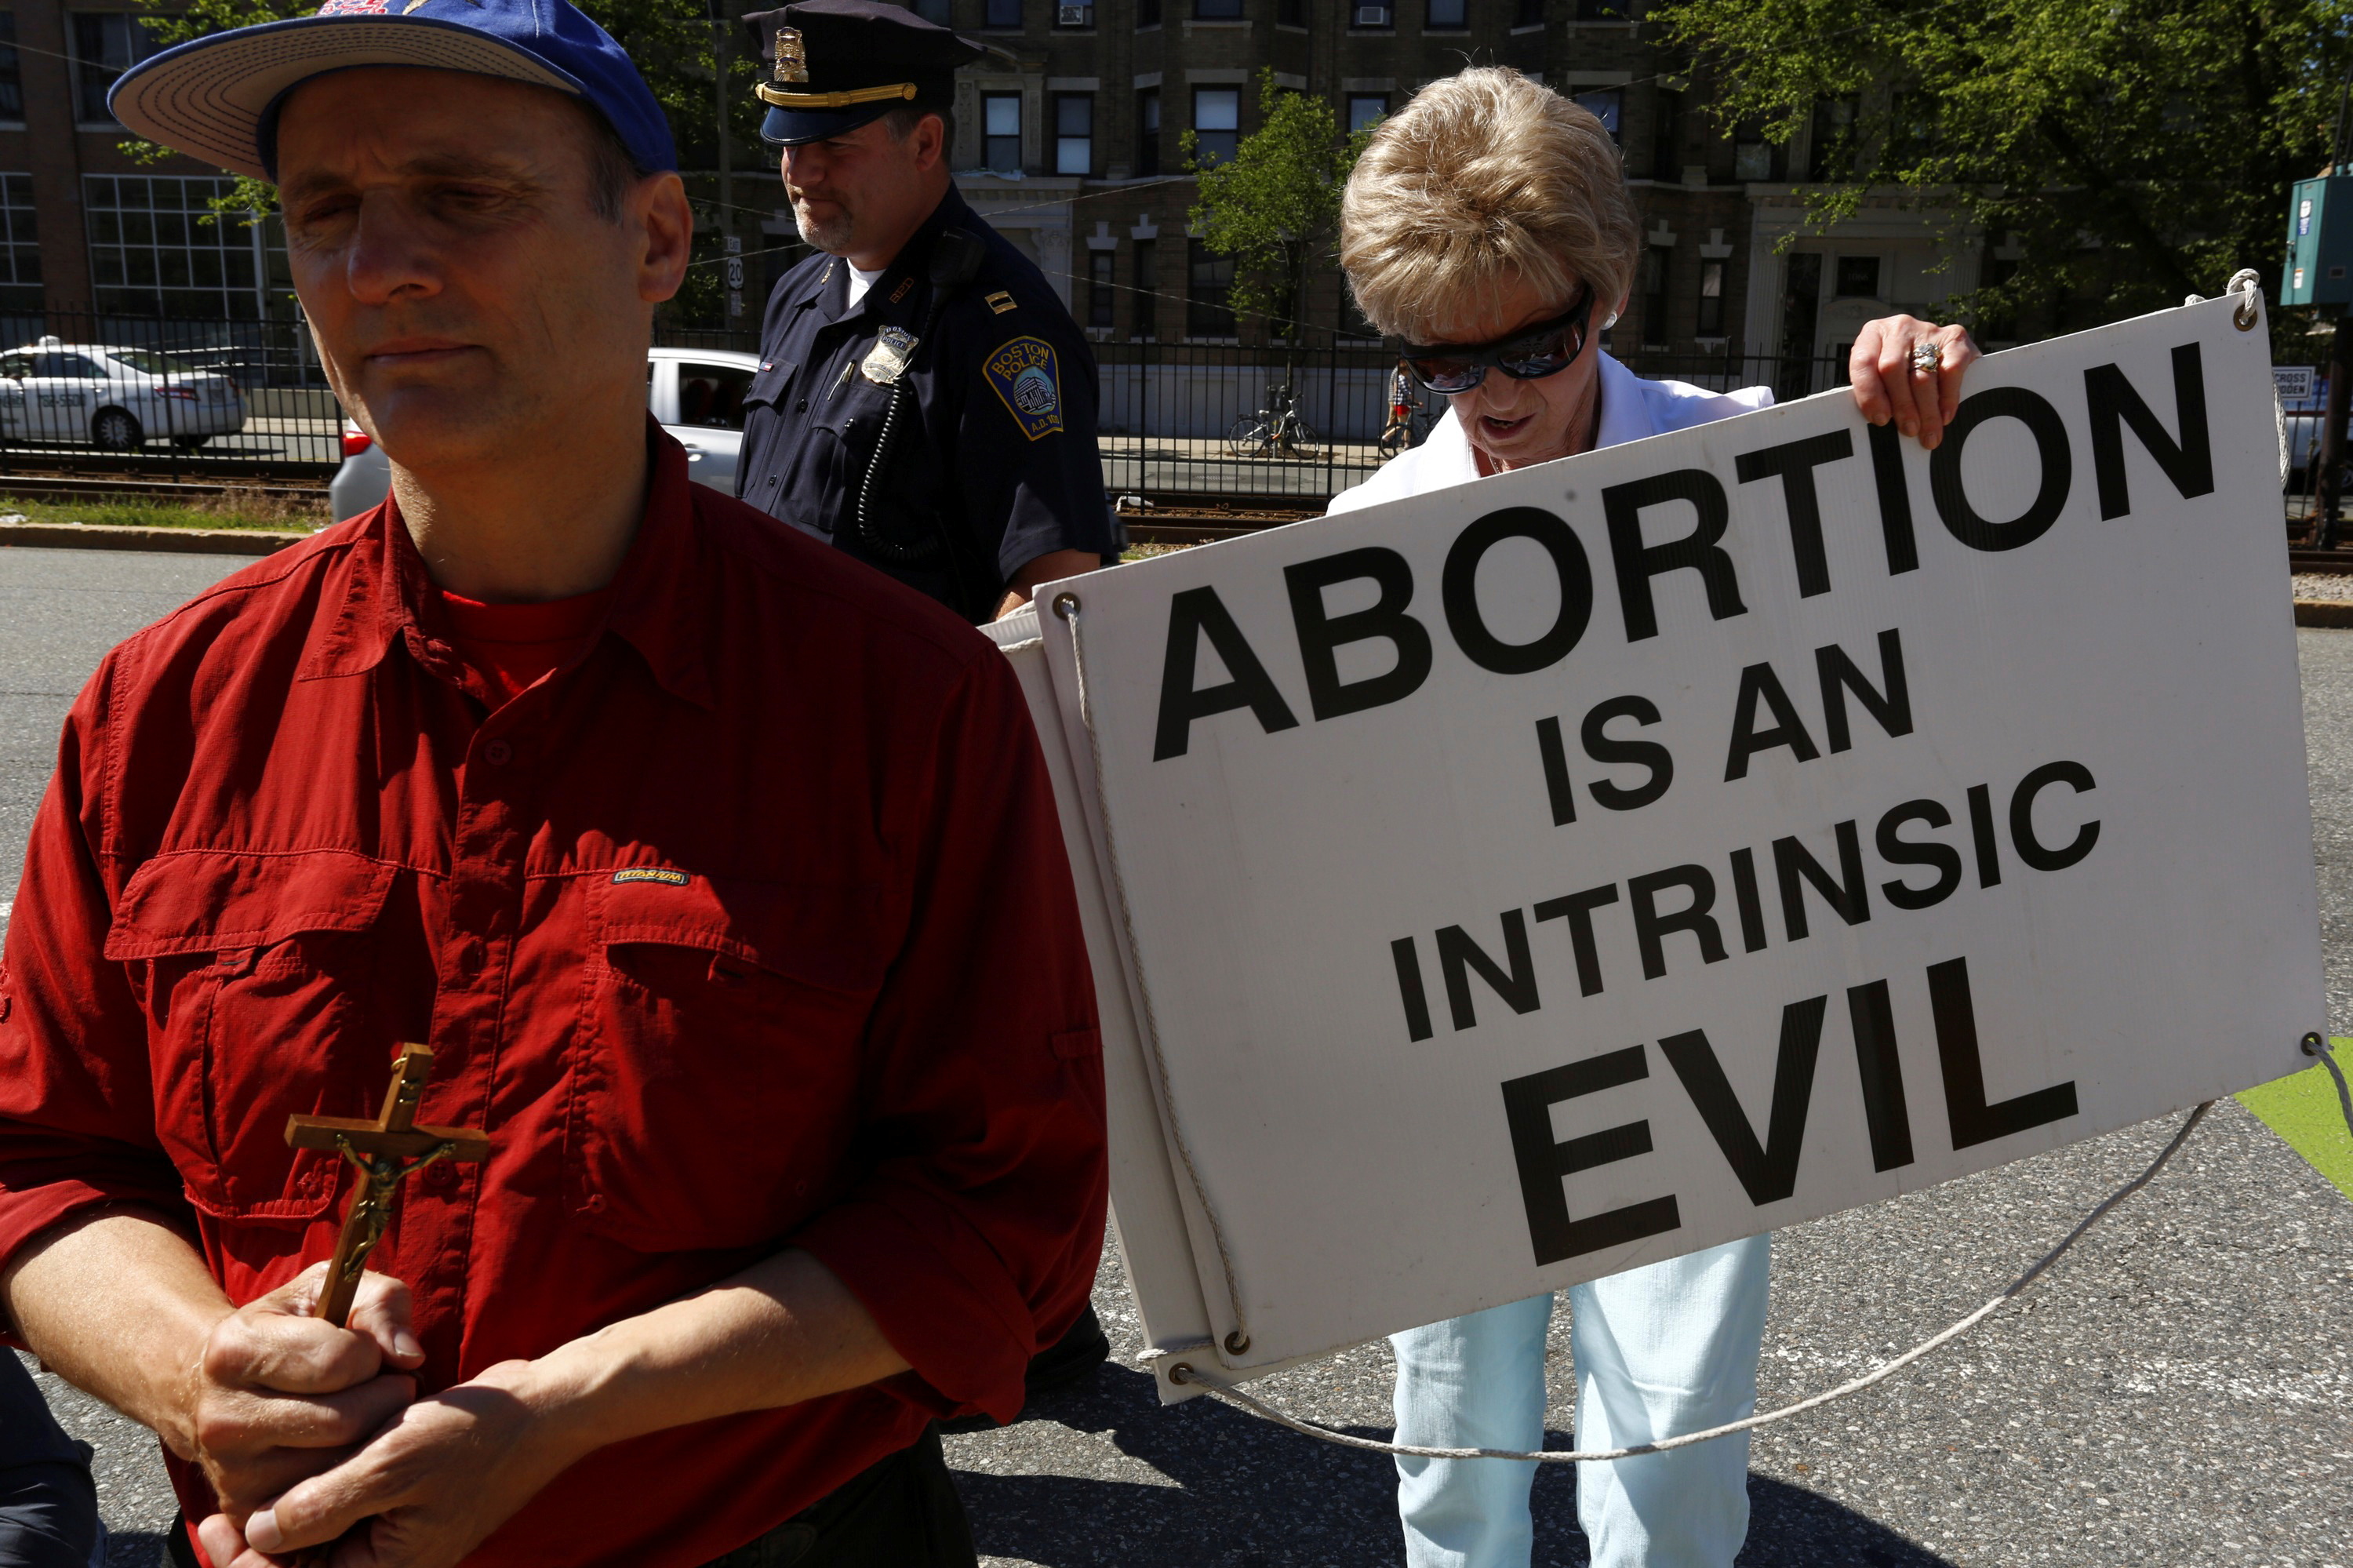 An abortion protester moves her sign out of the street in front of a Planned Parenthood clinic in Boston, Massachusetts